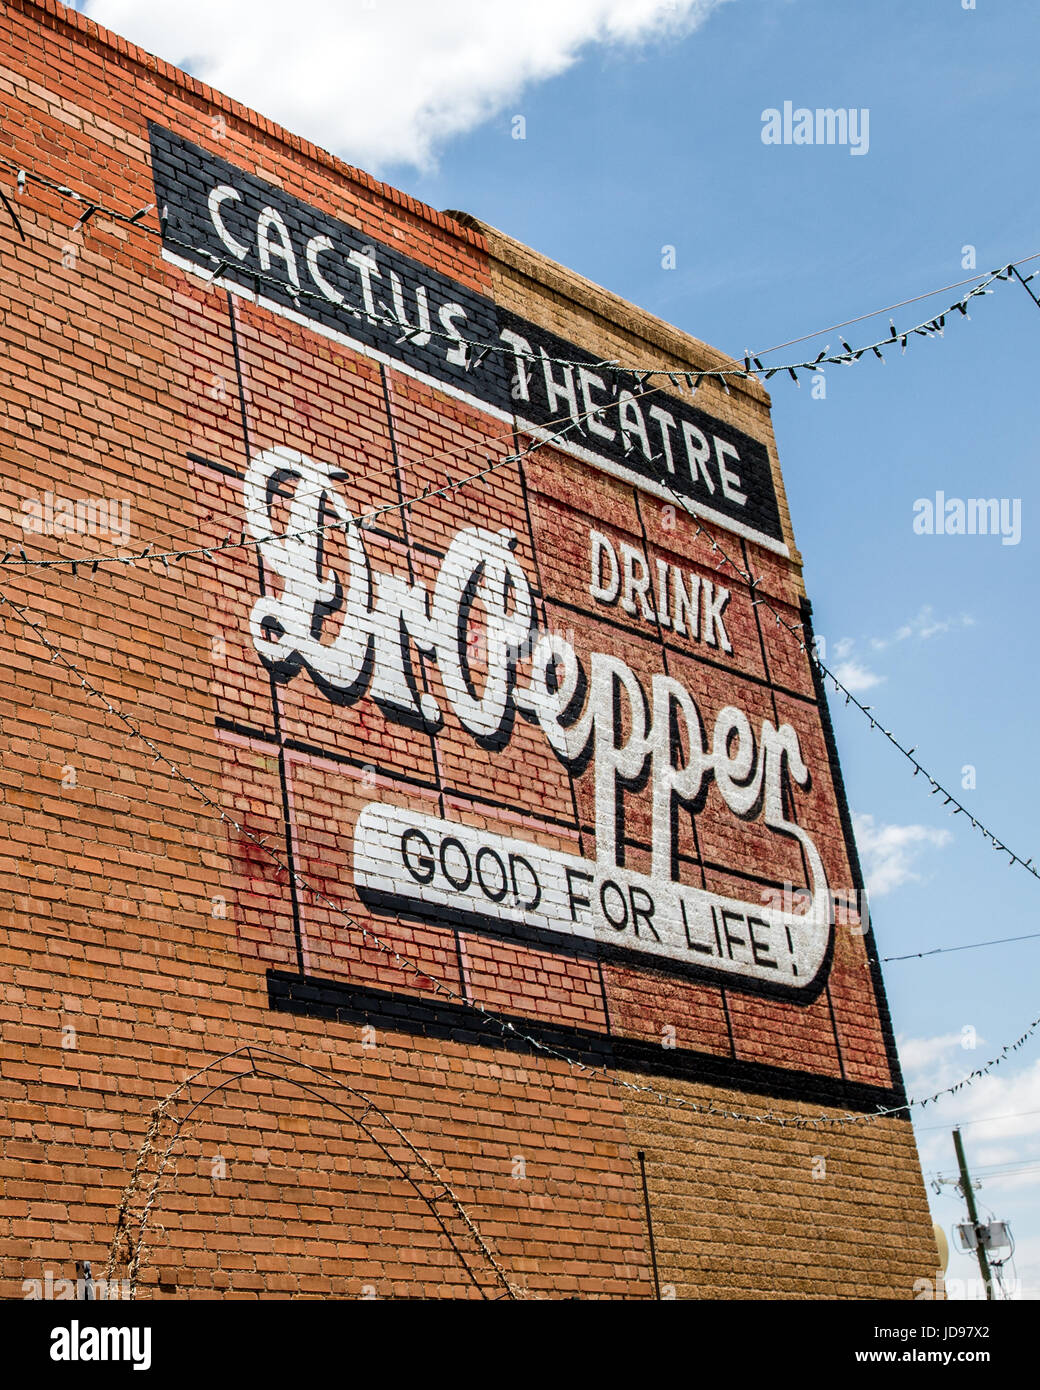 Dr. Pepper advertisement on side of Cactus Theatre building in Lubbock Texas Stock Photo